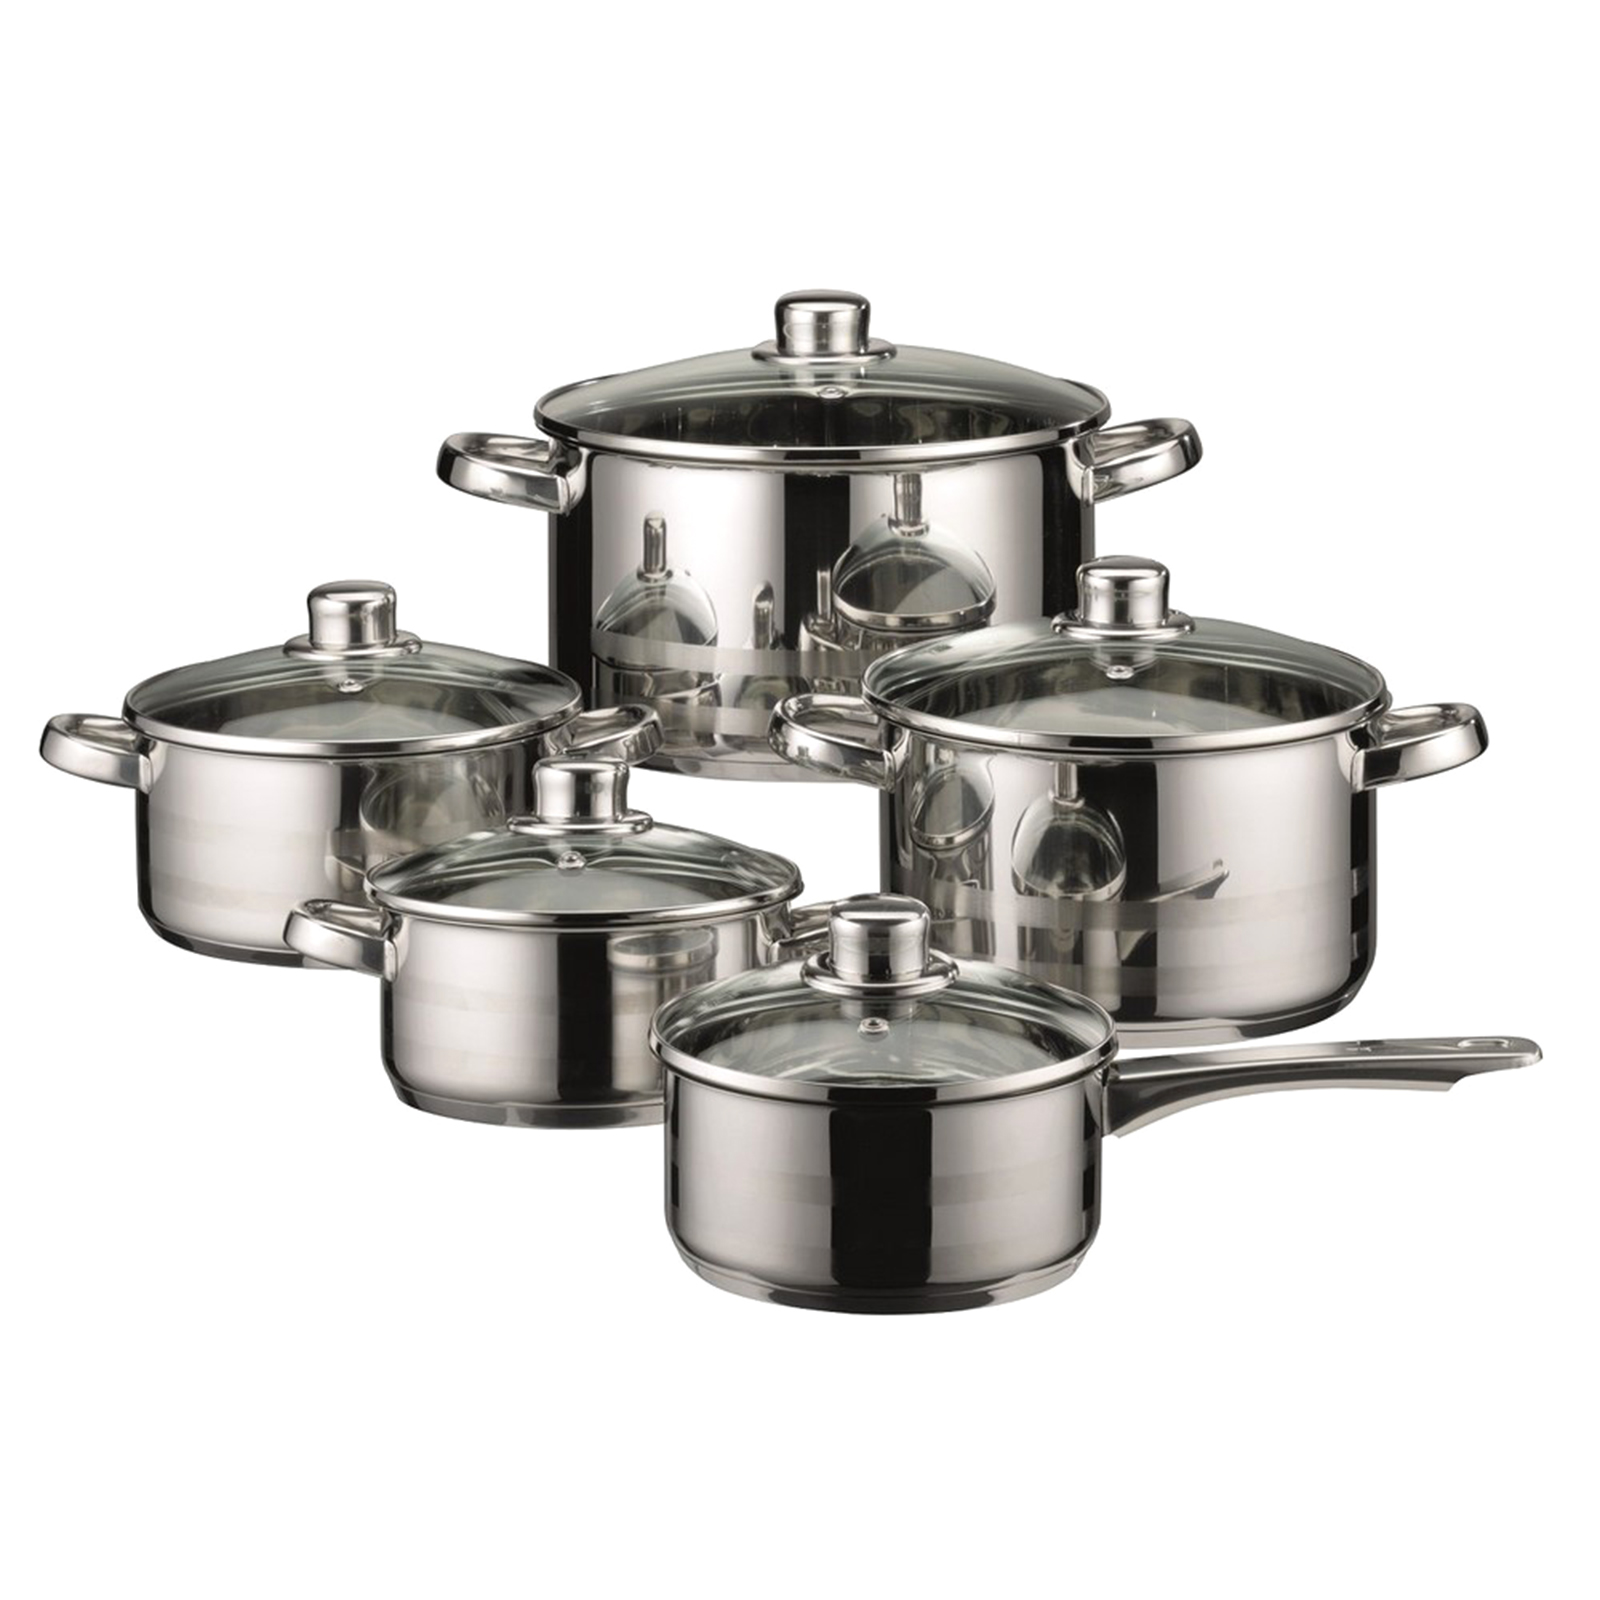 ELO Cookware Skyline 10pc. Stainless Steel Induction Cookware Set